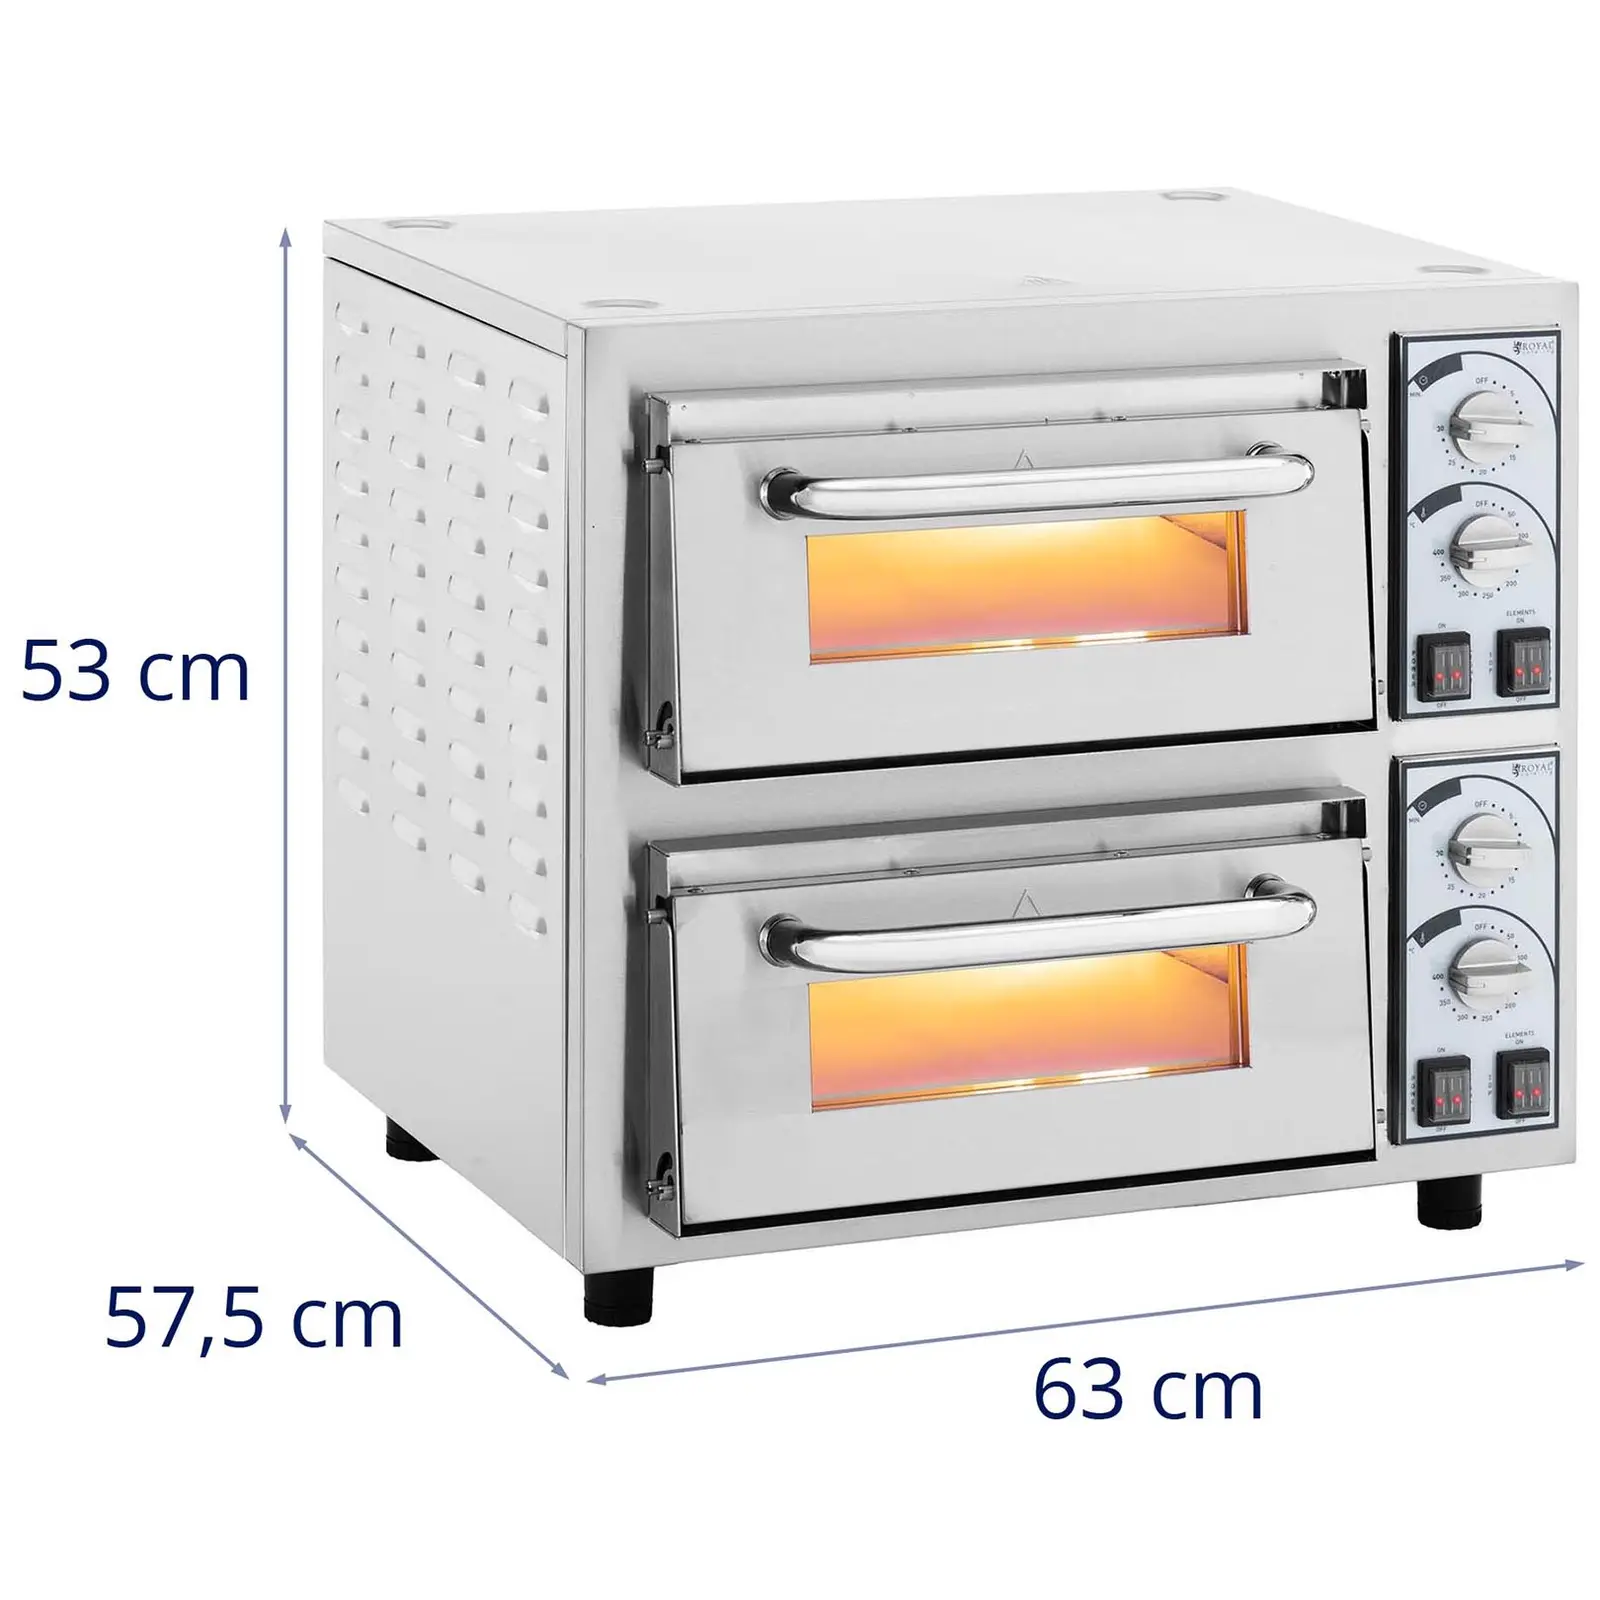 Pizzaovn - 2 kammer - 4750 W - Ø 40 cm - ildfast stein - Royal Catering